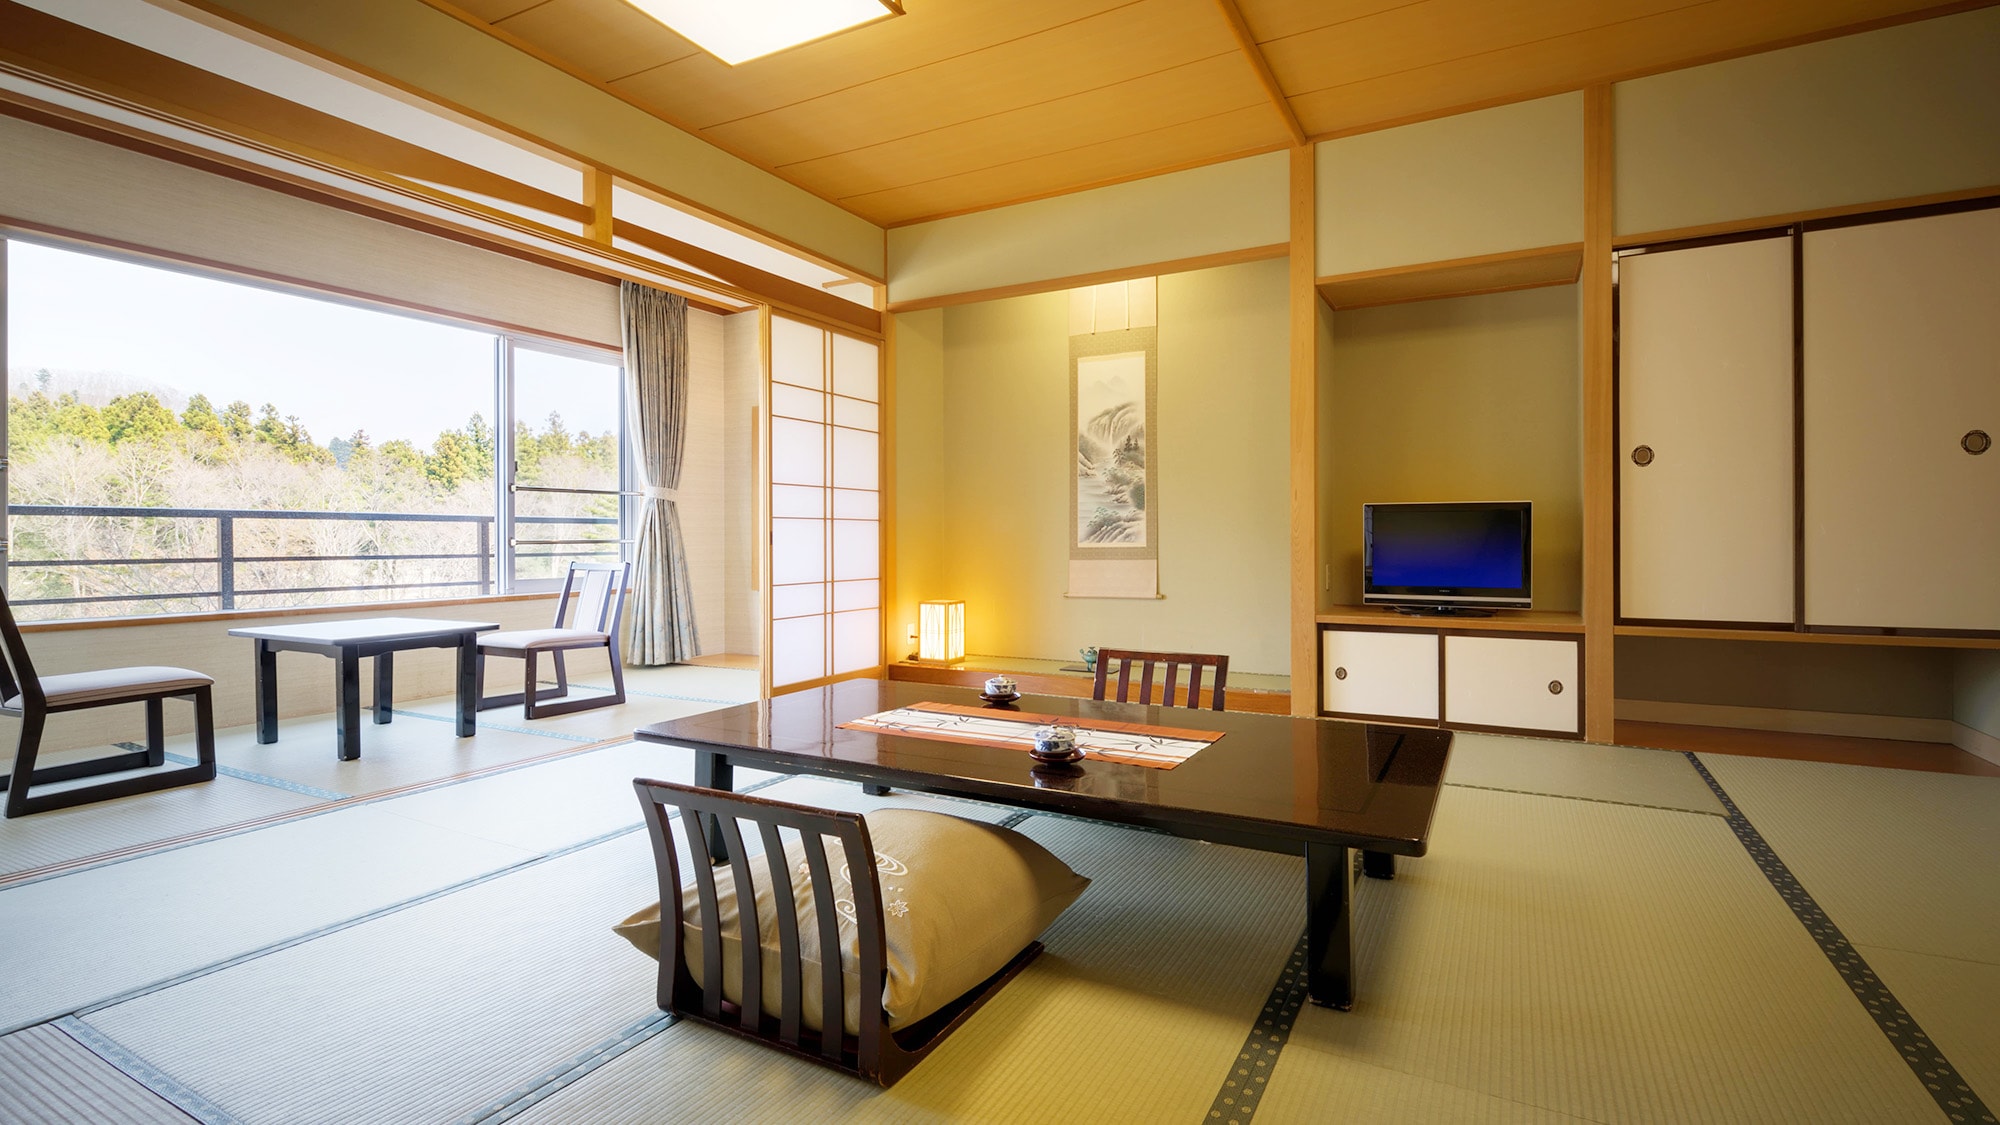 Japanese-style room [No smoking] & hellip; You can relax with your family. All rooms are non-smoking rooms.